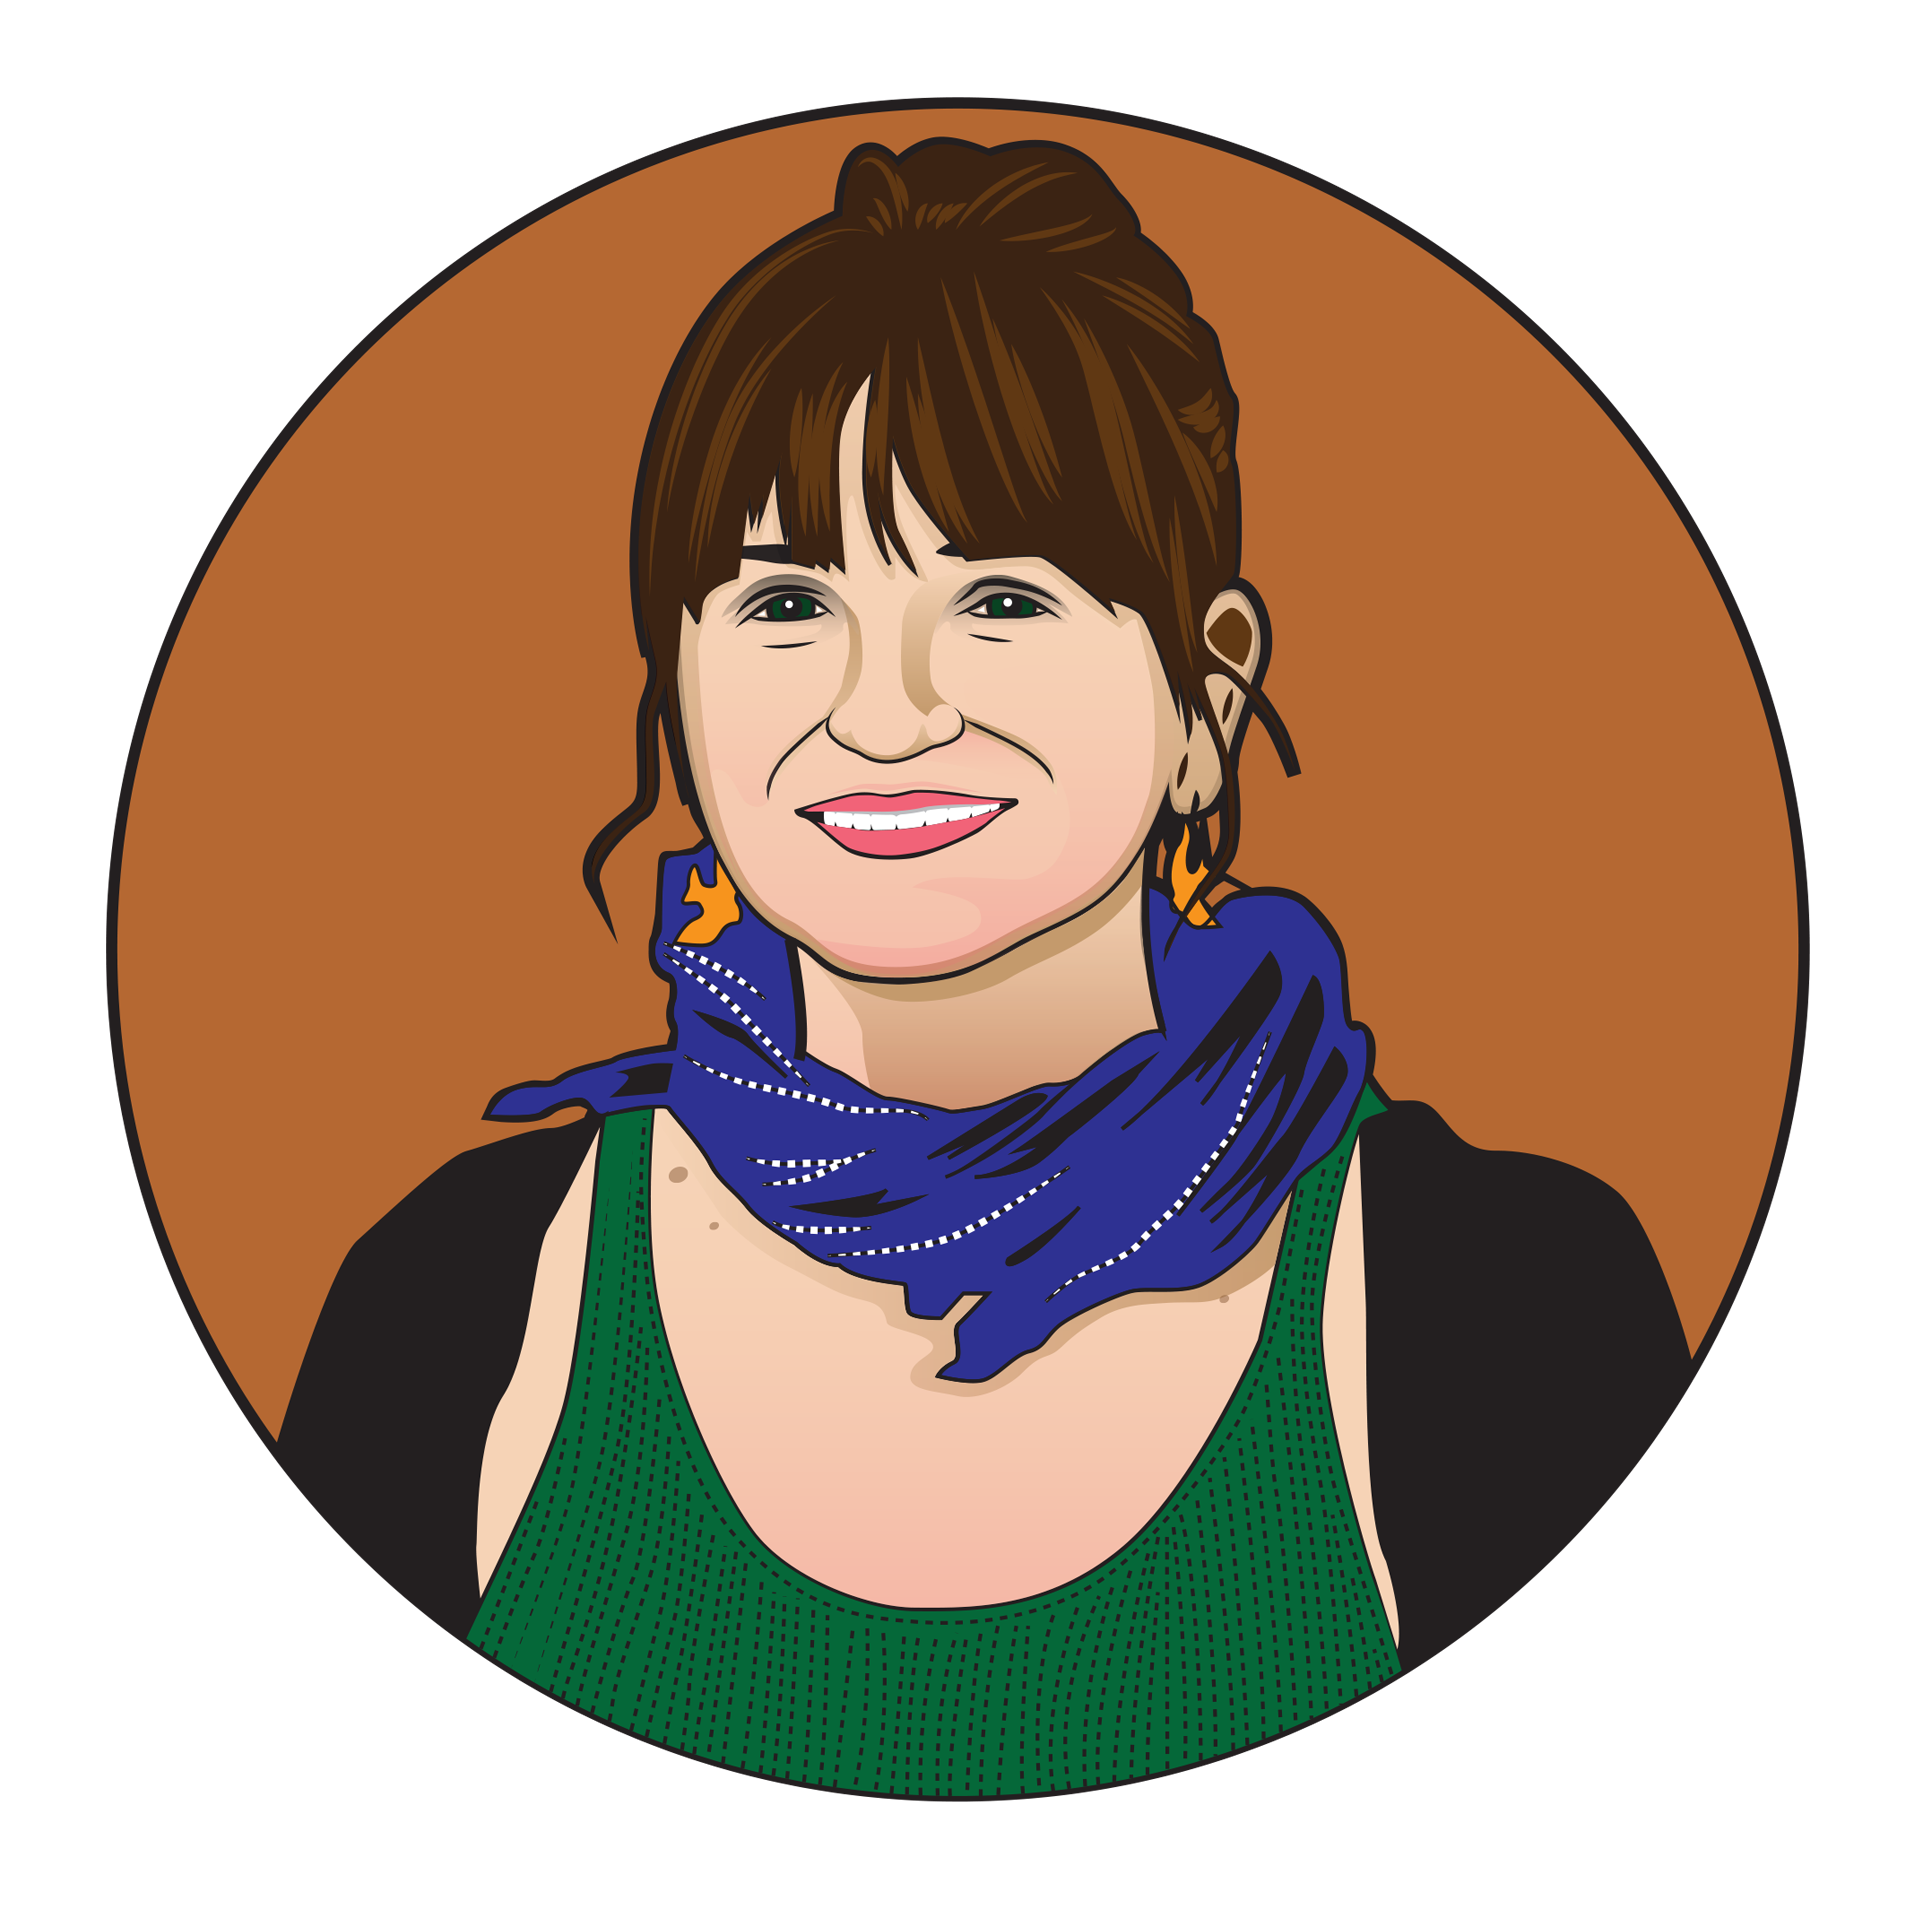 An illustrated image of Keely, a white woman wearing a black sweater, green tank top, and blue scarf. She has brown hair and is wearing pink lipstick. Her image is on an orange background.